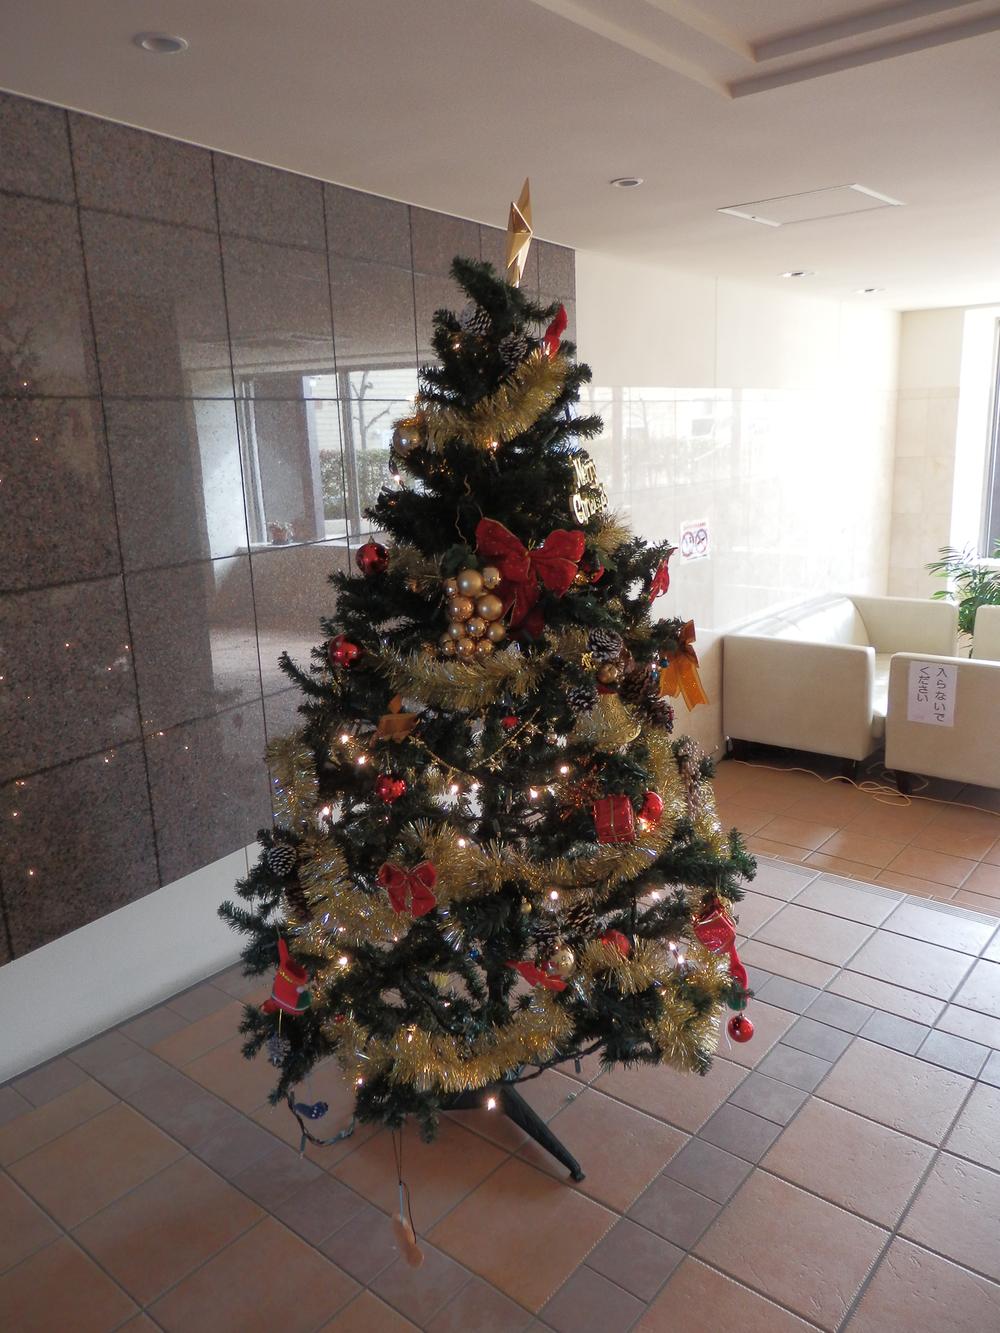 lobby. It's stylish apartment Nante Christmas tree is decorated in the common area lobby